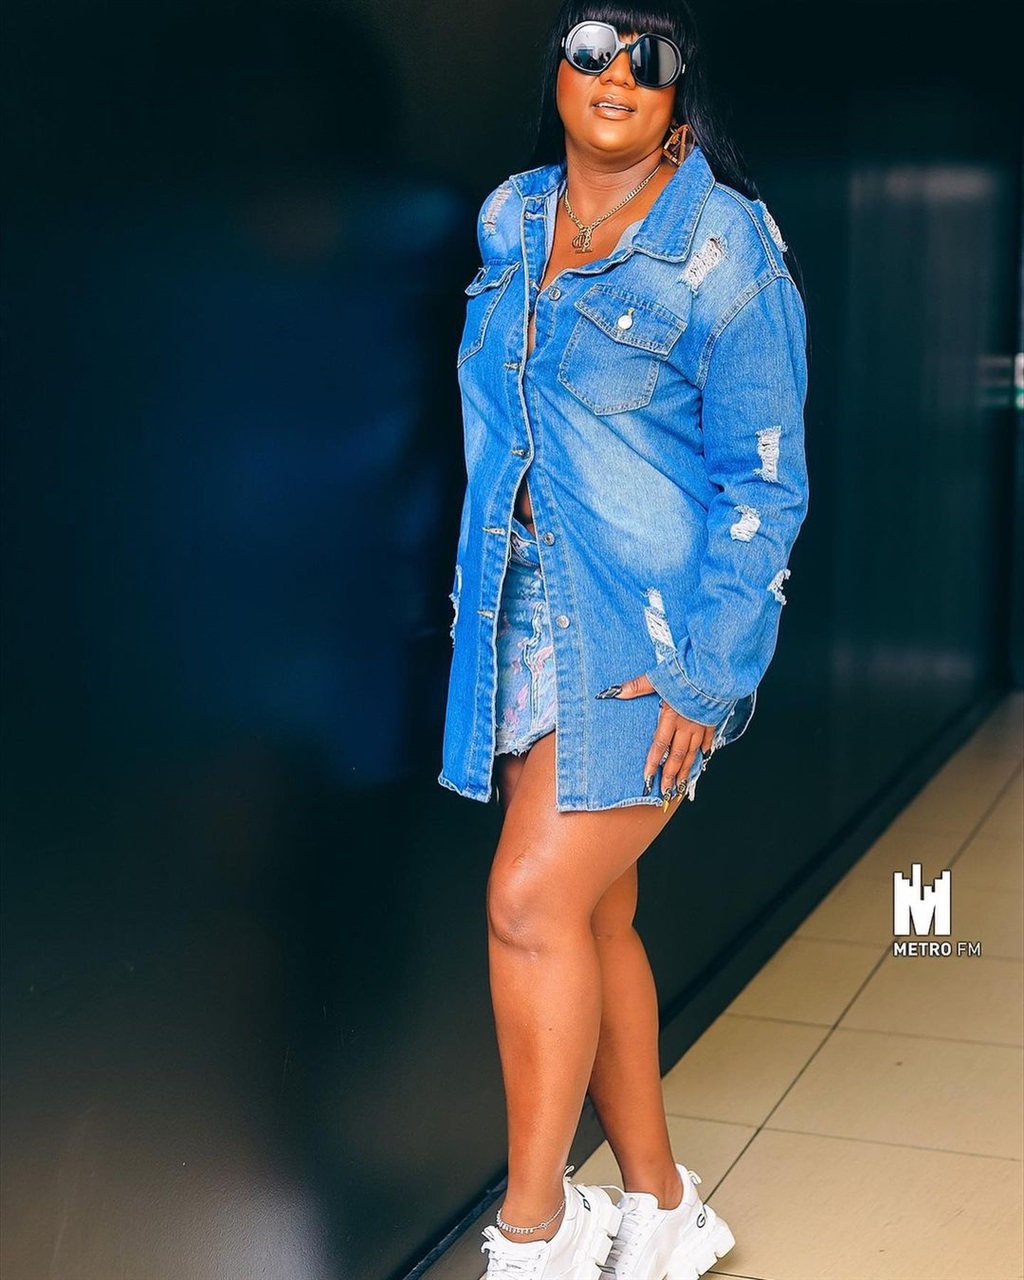 Shauwn Mkhize visited Metro FM to talk about her m